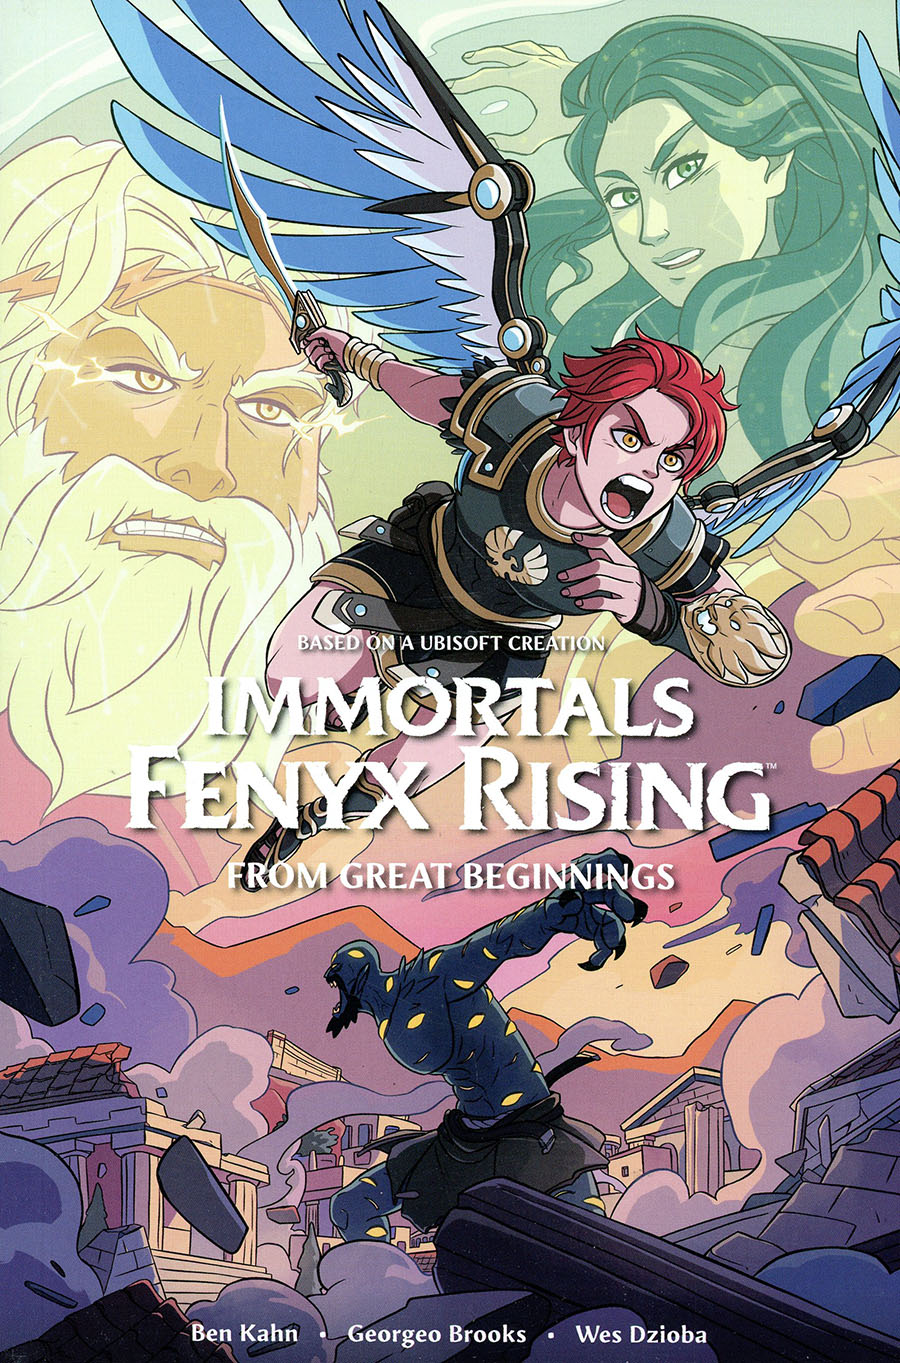 Immortals Fenyx Rising From Great Beginnings TP